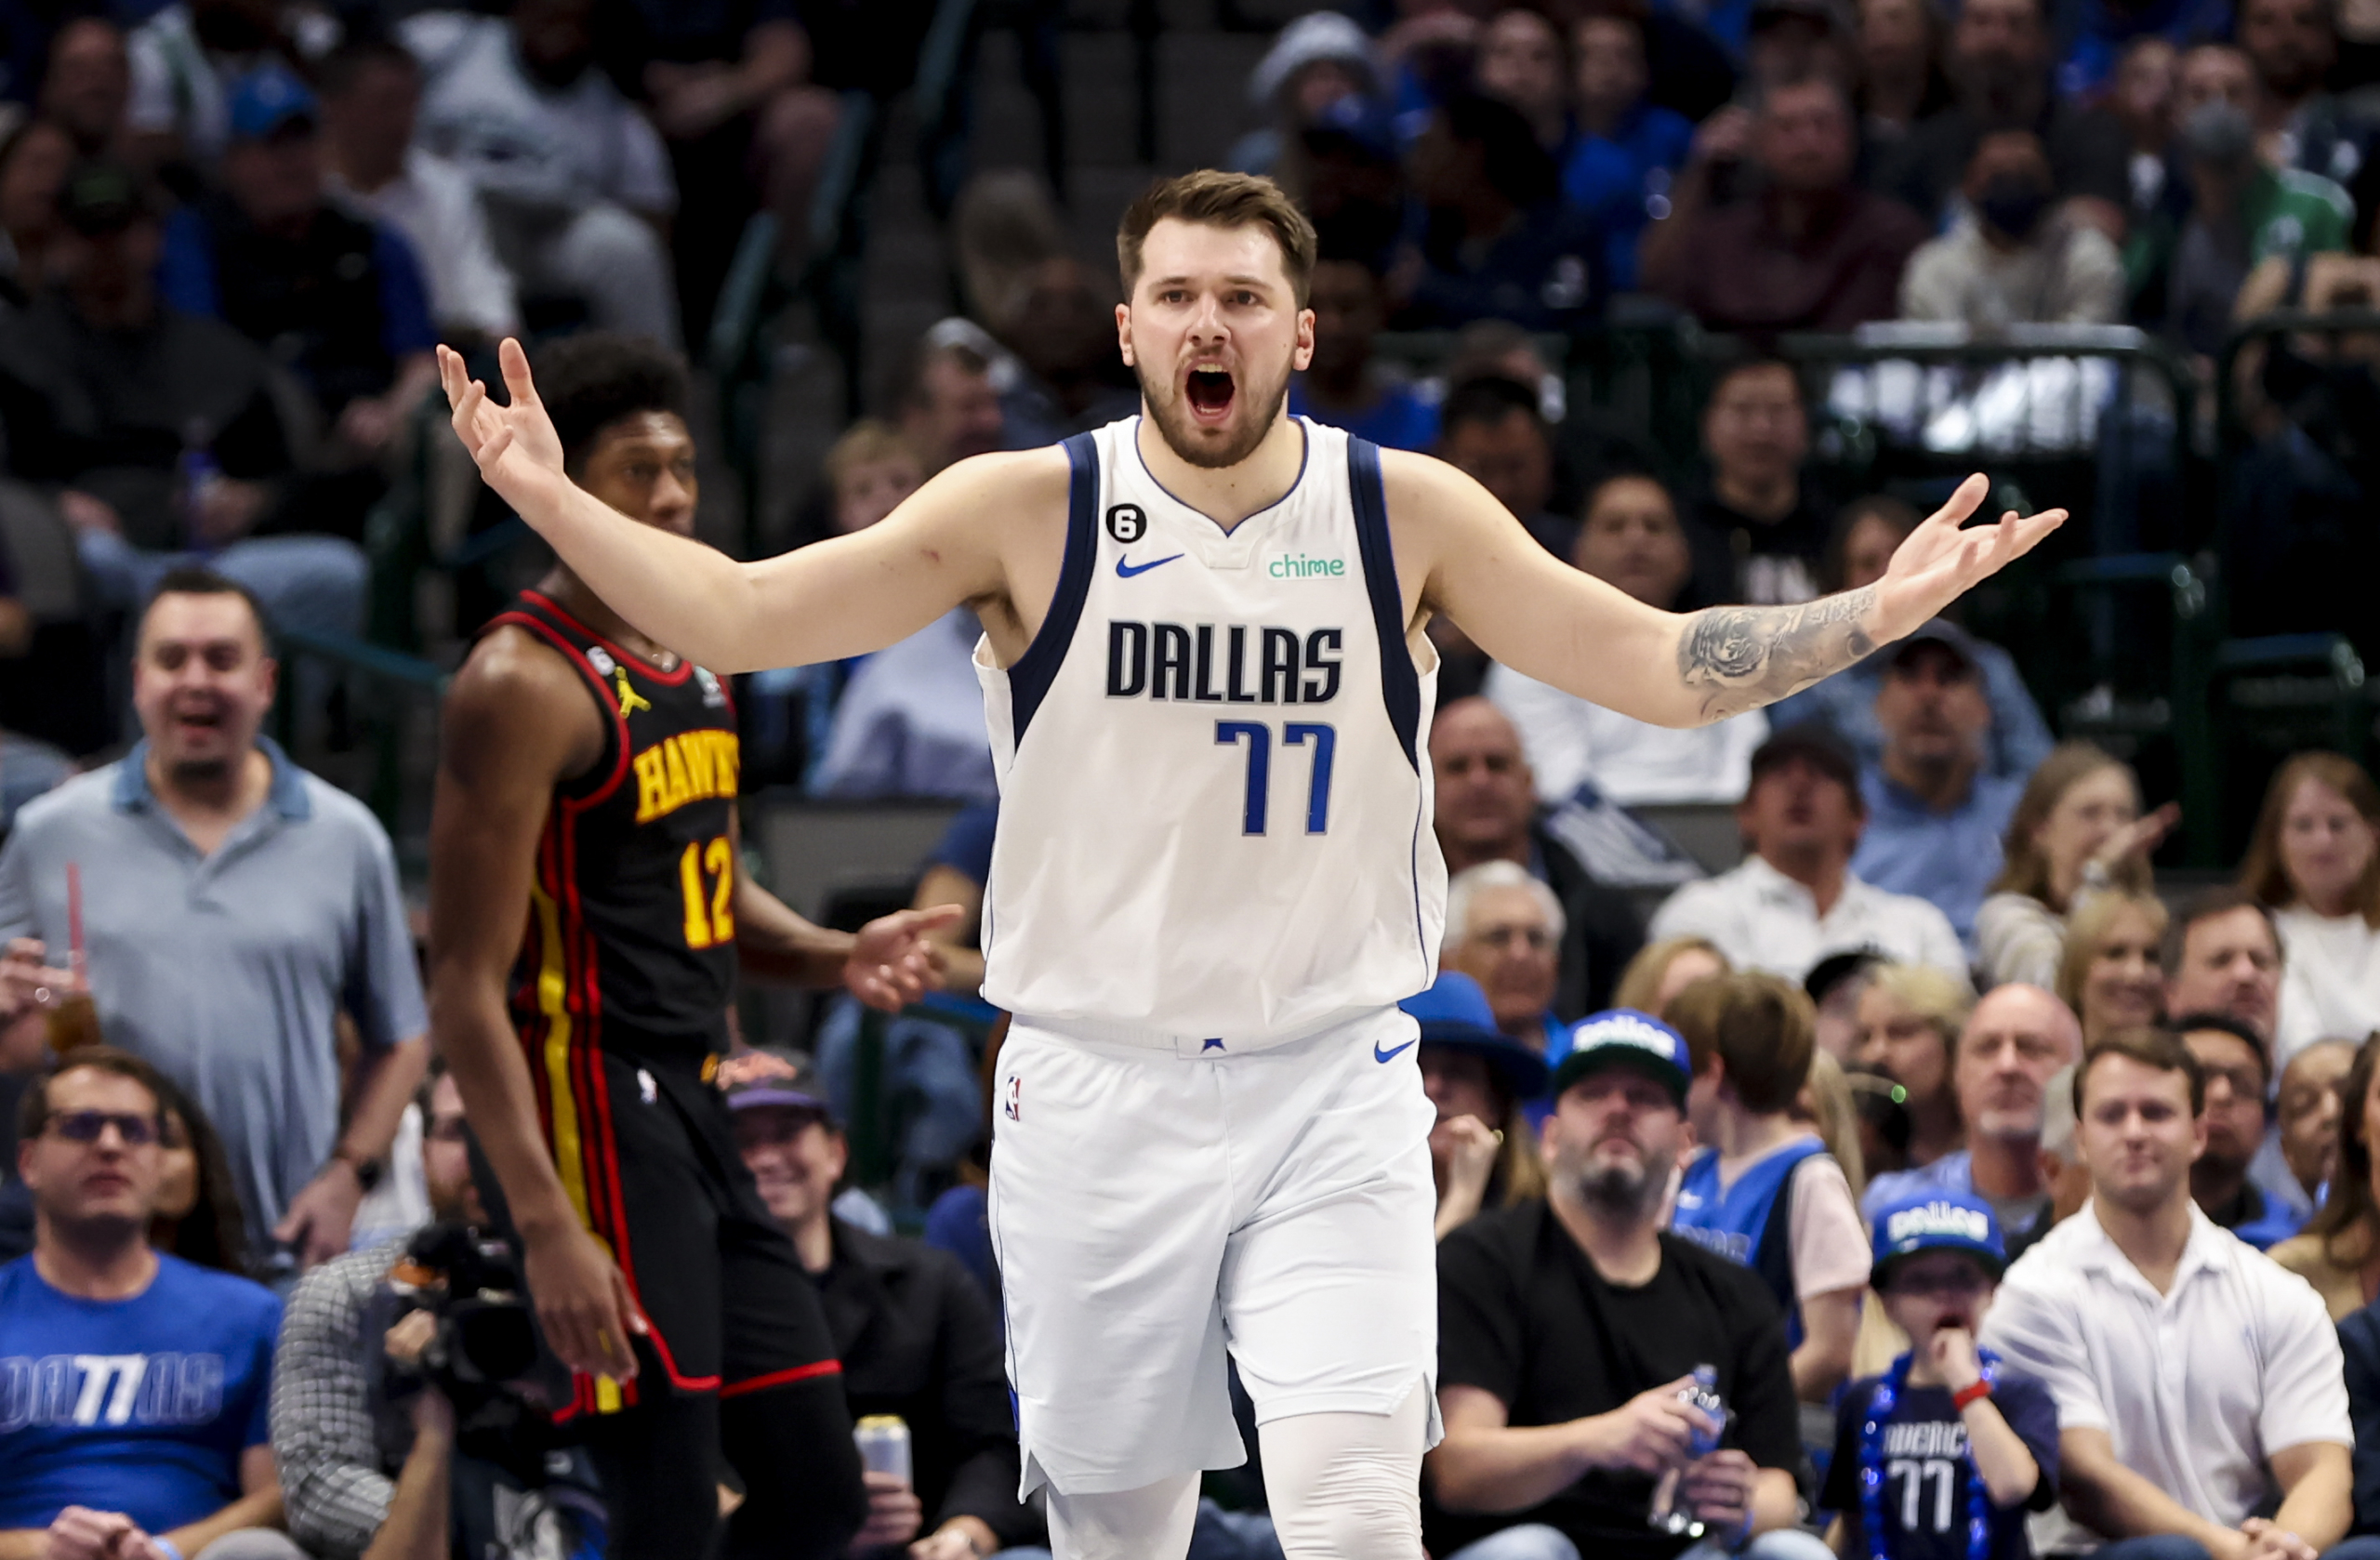 Mavericks Star Luka Doncic Has The Fourth Most Popular Jersey In The NBA